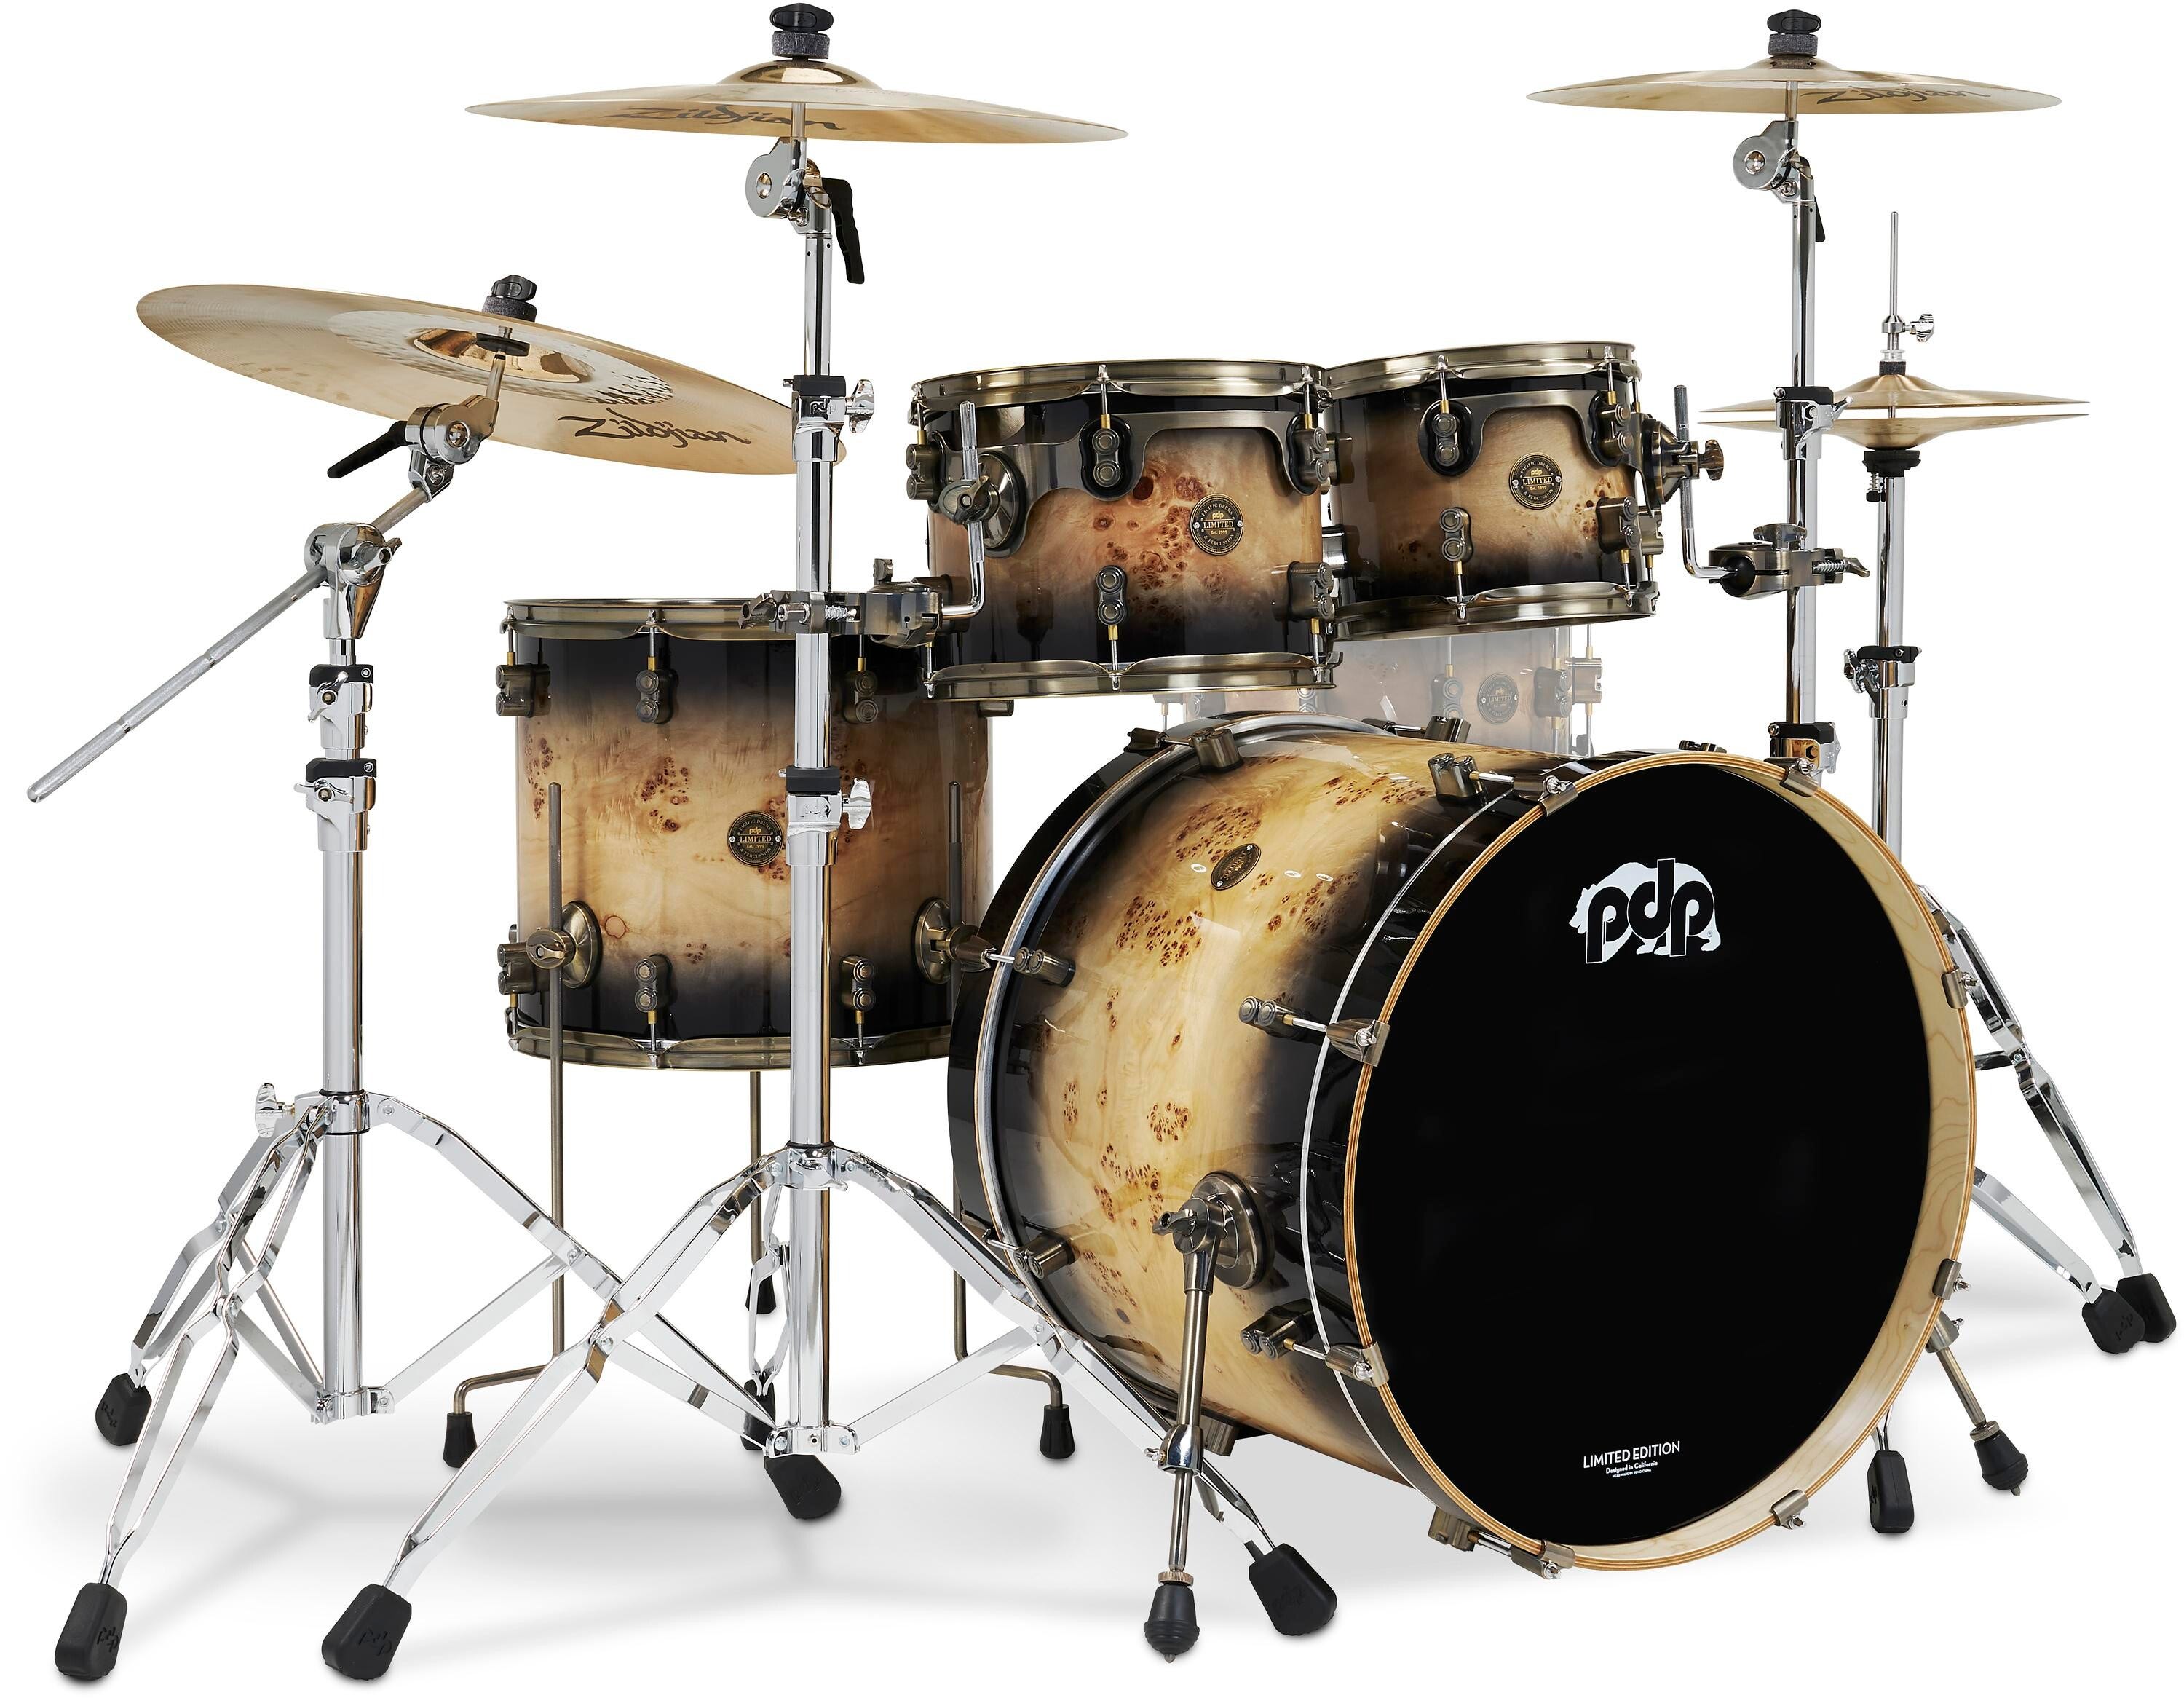 PDP Concept Limited Mapa Burl 4-piece Shell Pack - Mapa Burl to